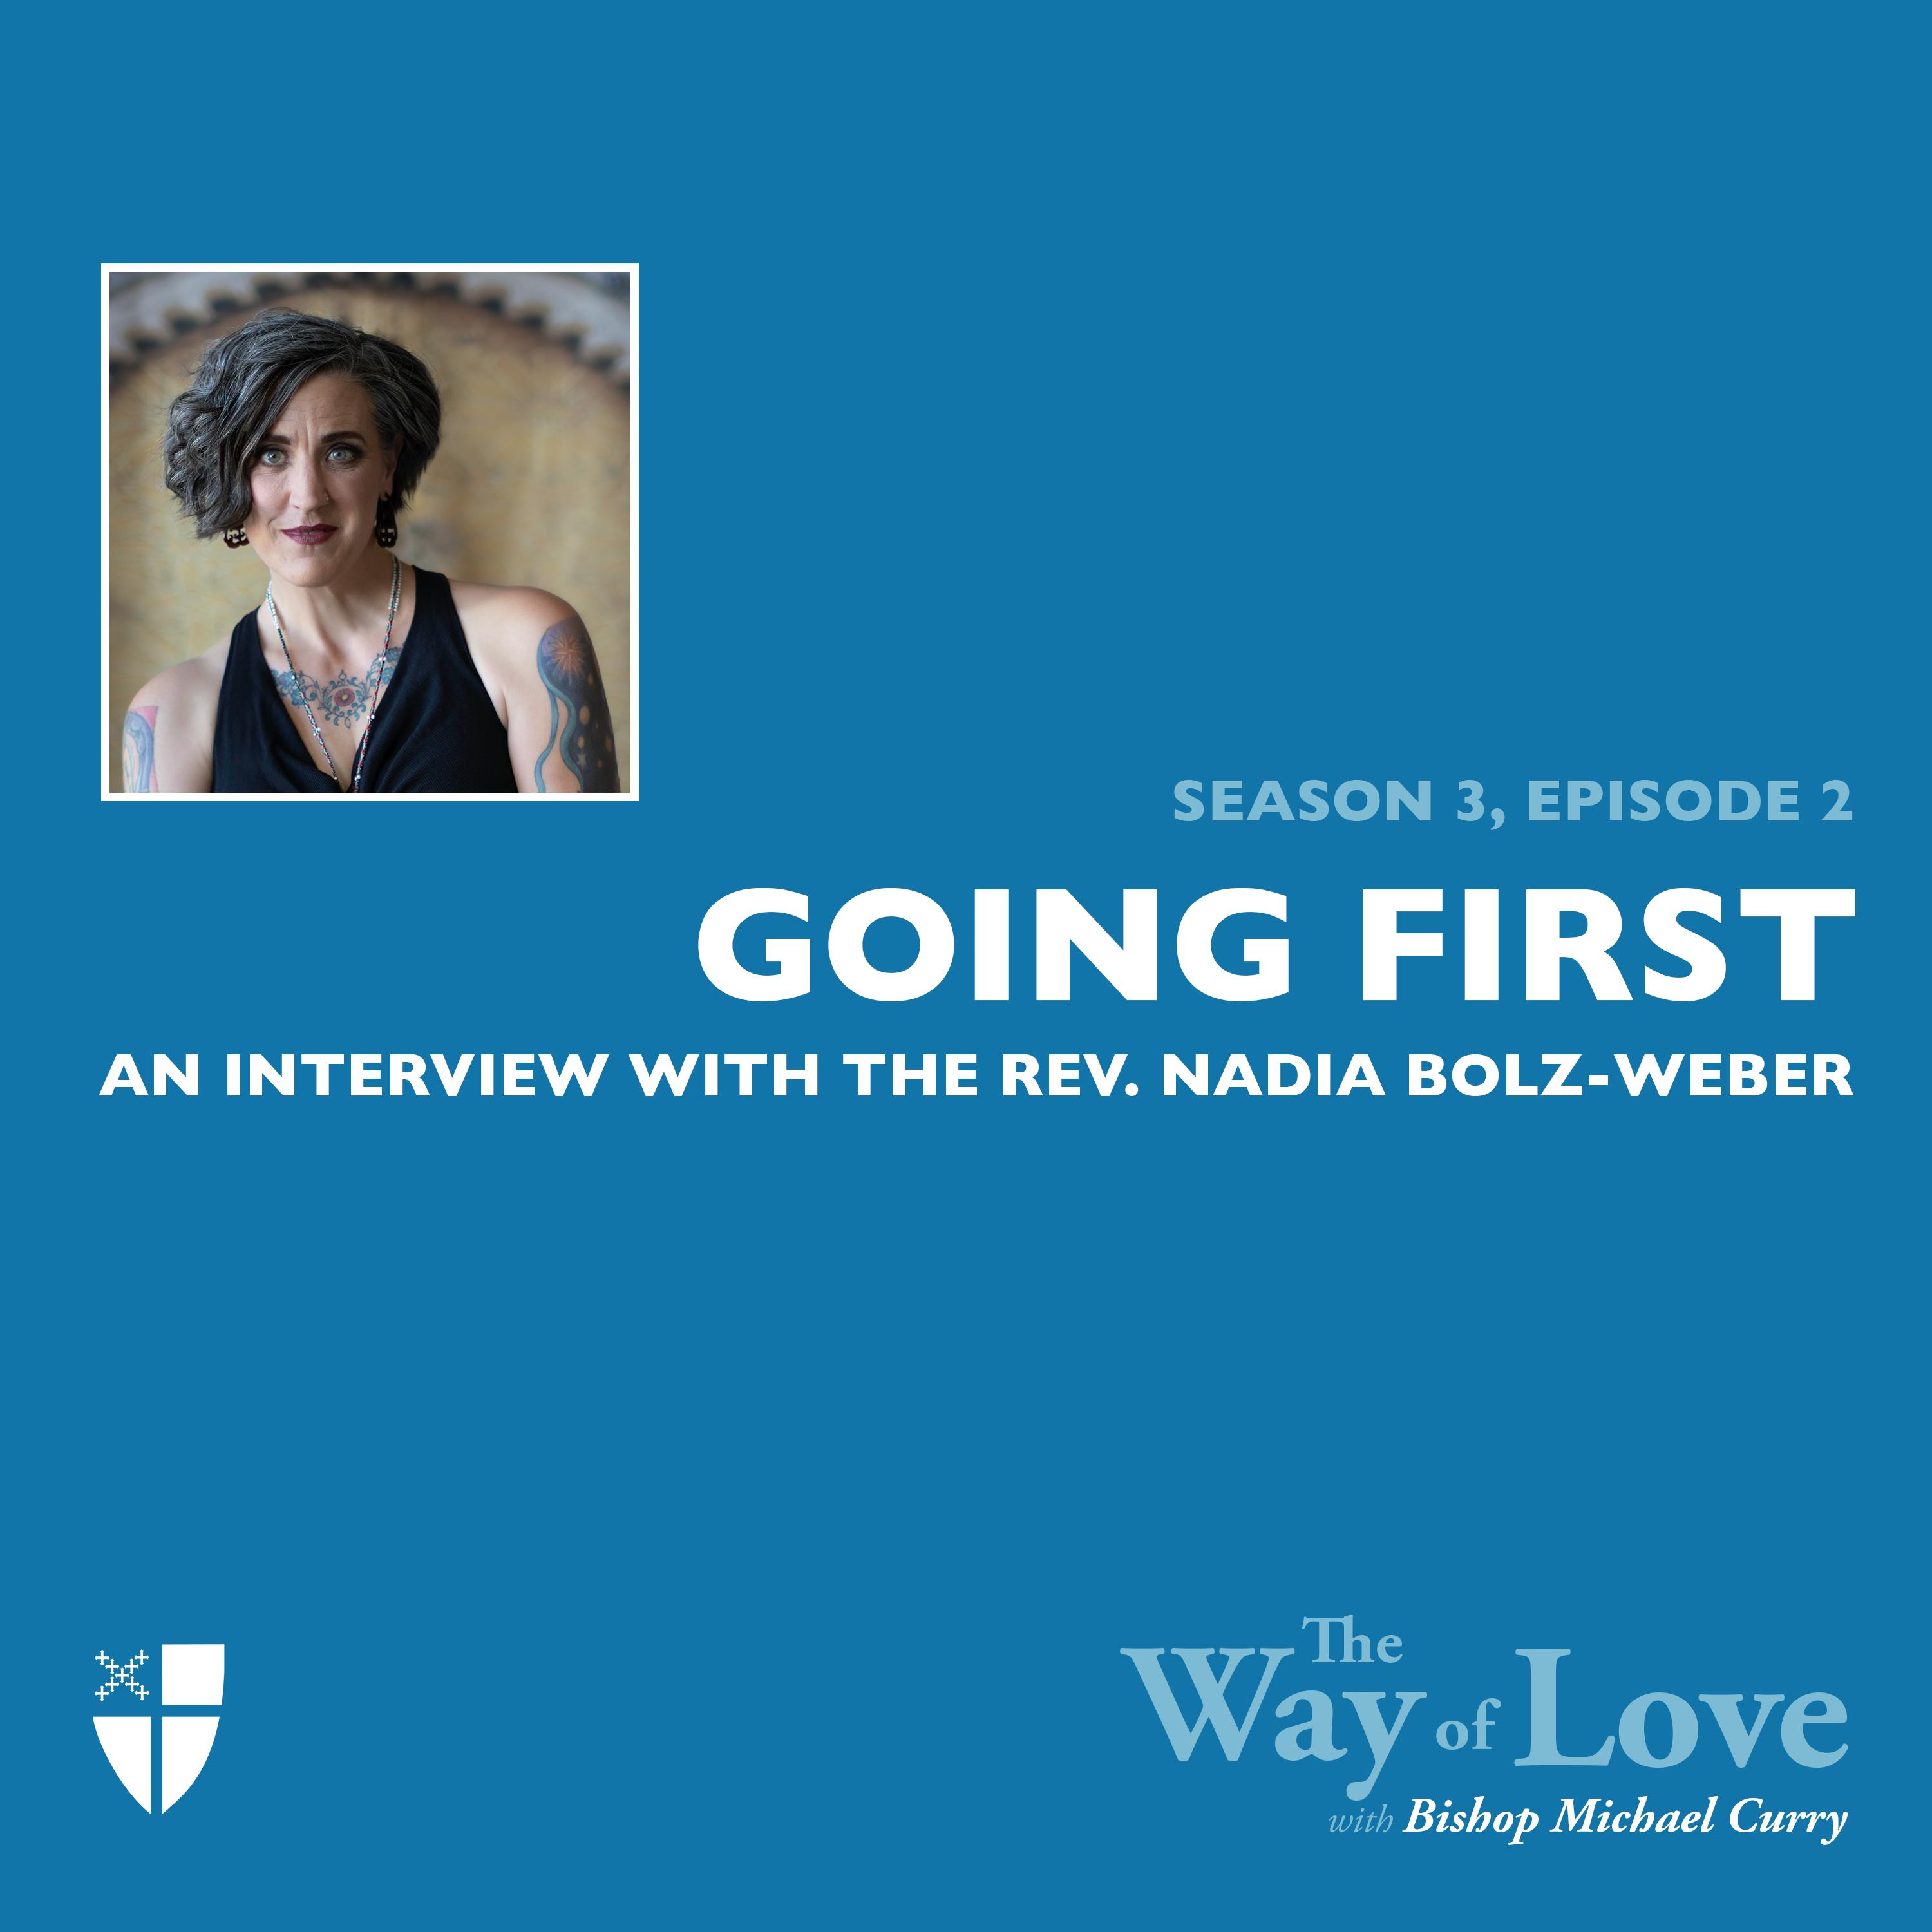 Going First with the Rev. Nadia Bolz-Weber